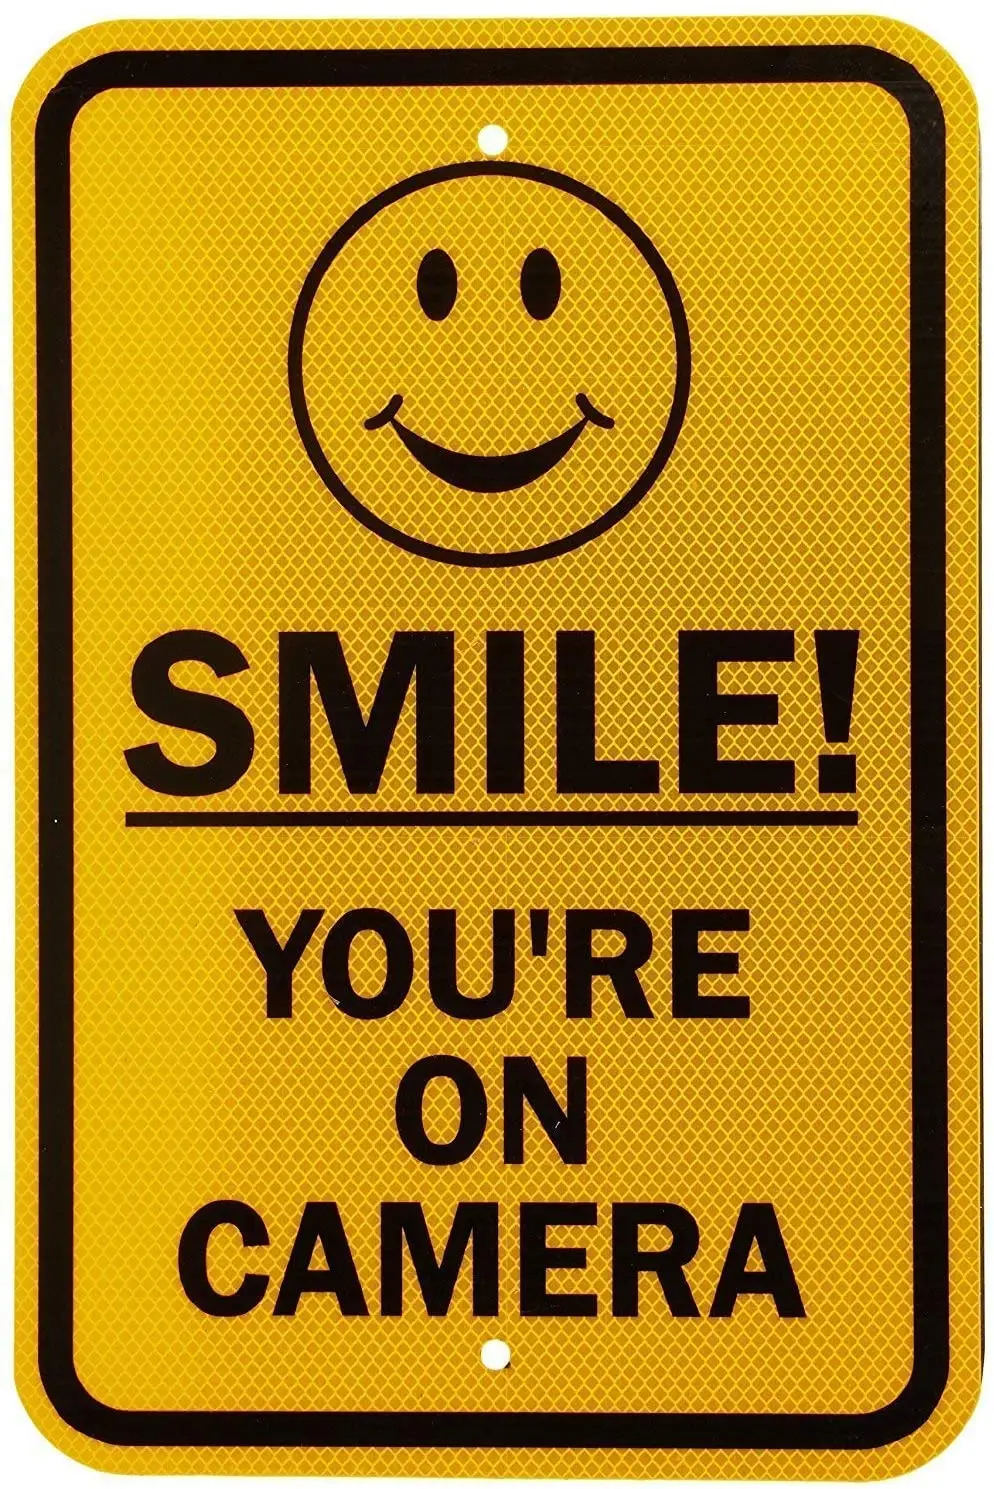 

Smile! You're On Camera Metal Tin Sign Plaque Wall Decor Art Shabby Chic Gift Suitable for Indoor/Outdoor 12x8 Inch